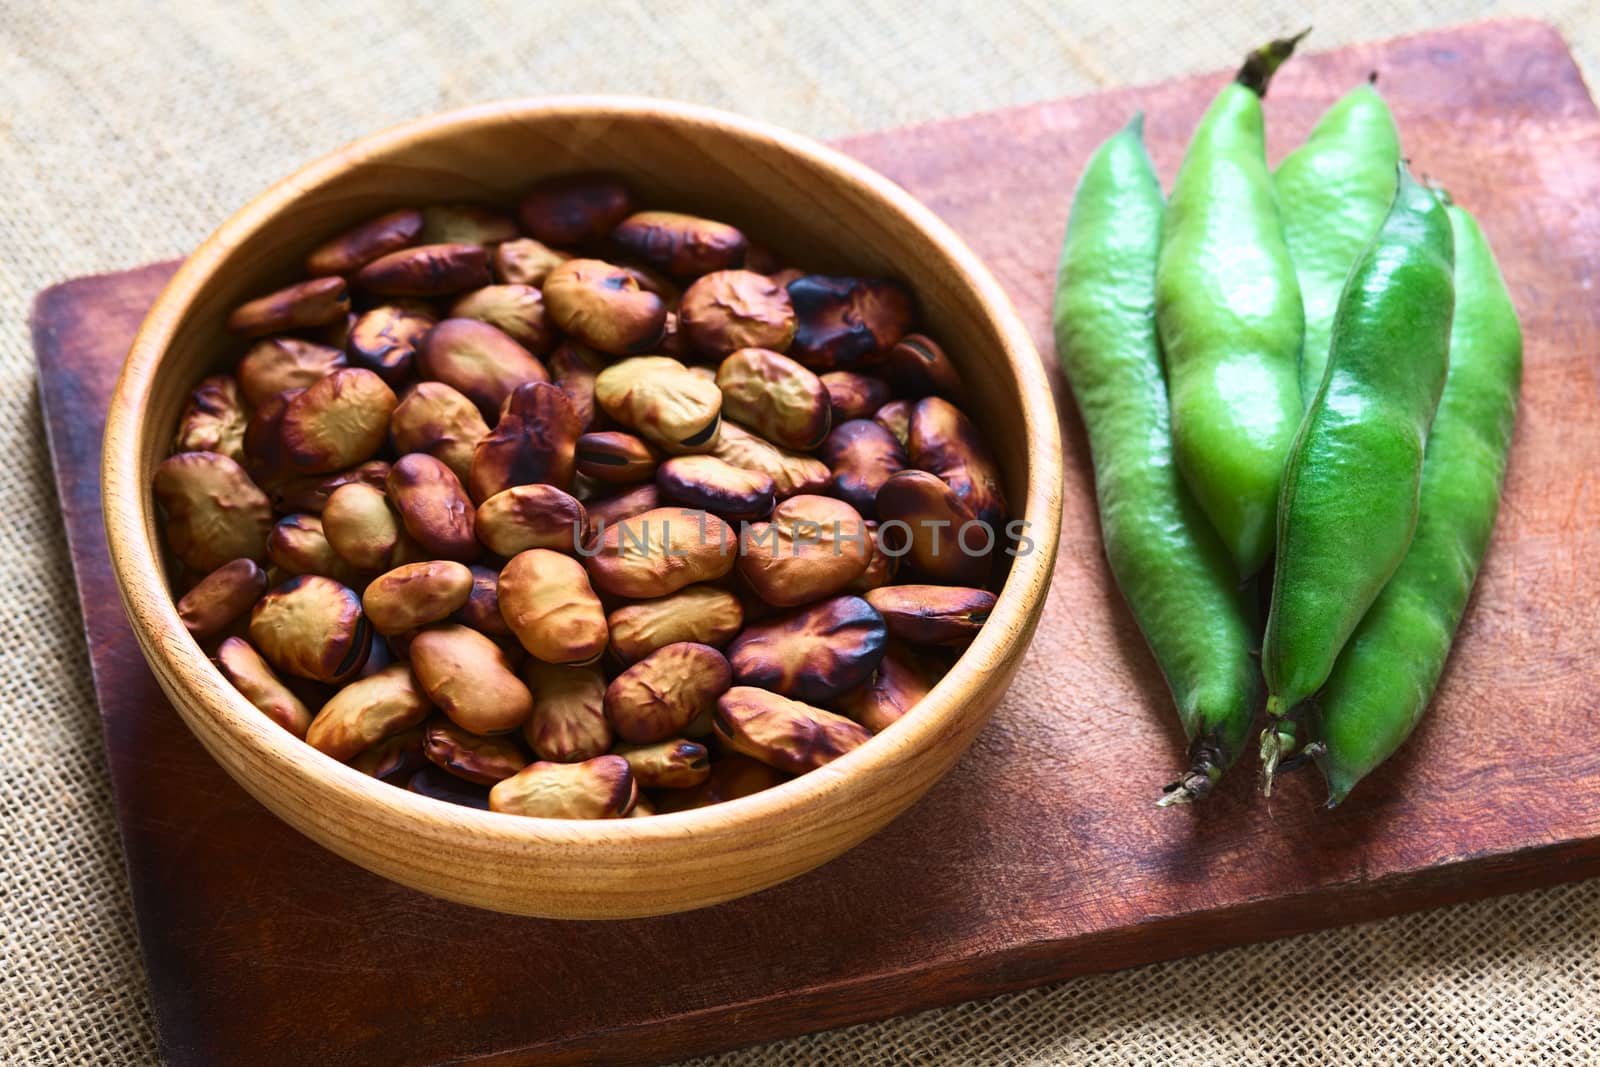 Roasted broad beans (lat. Vicia faba) eaten as snack in Bolivia in wooden bowl with fresh broad bean pods on the side, photographed with natural light (Selective Focus, Focus one third into the roasted beans)